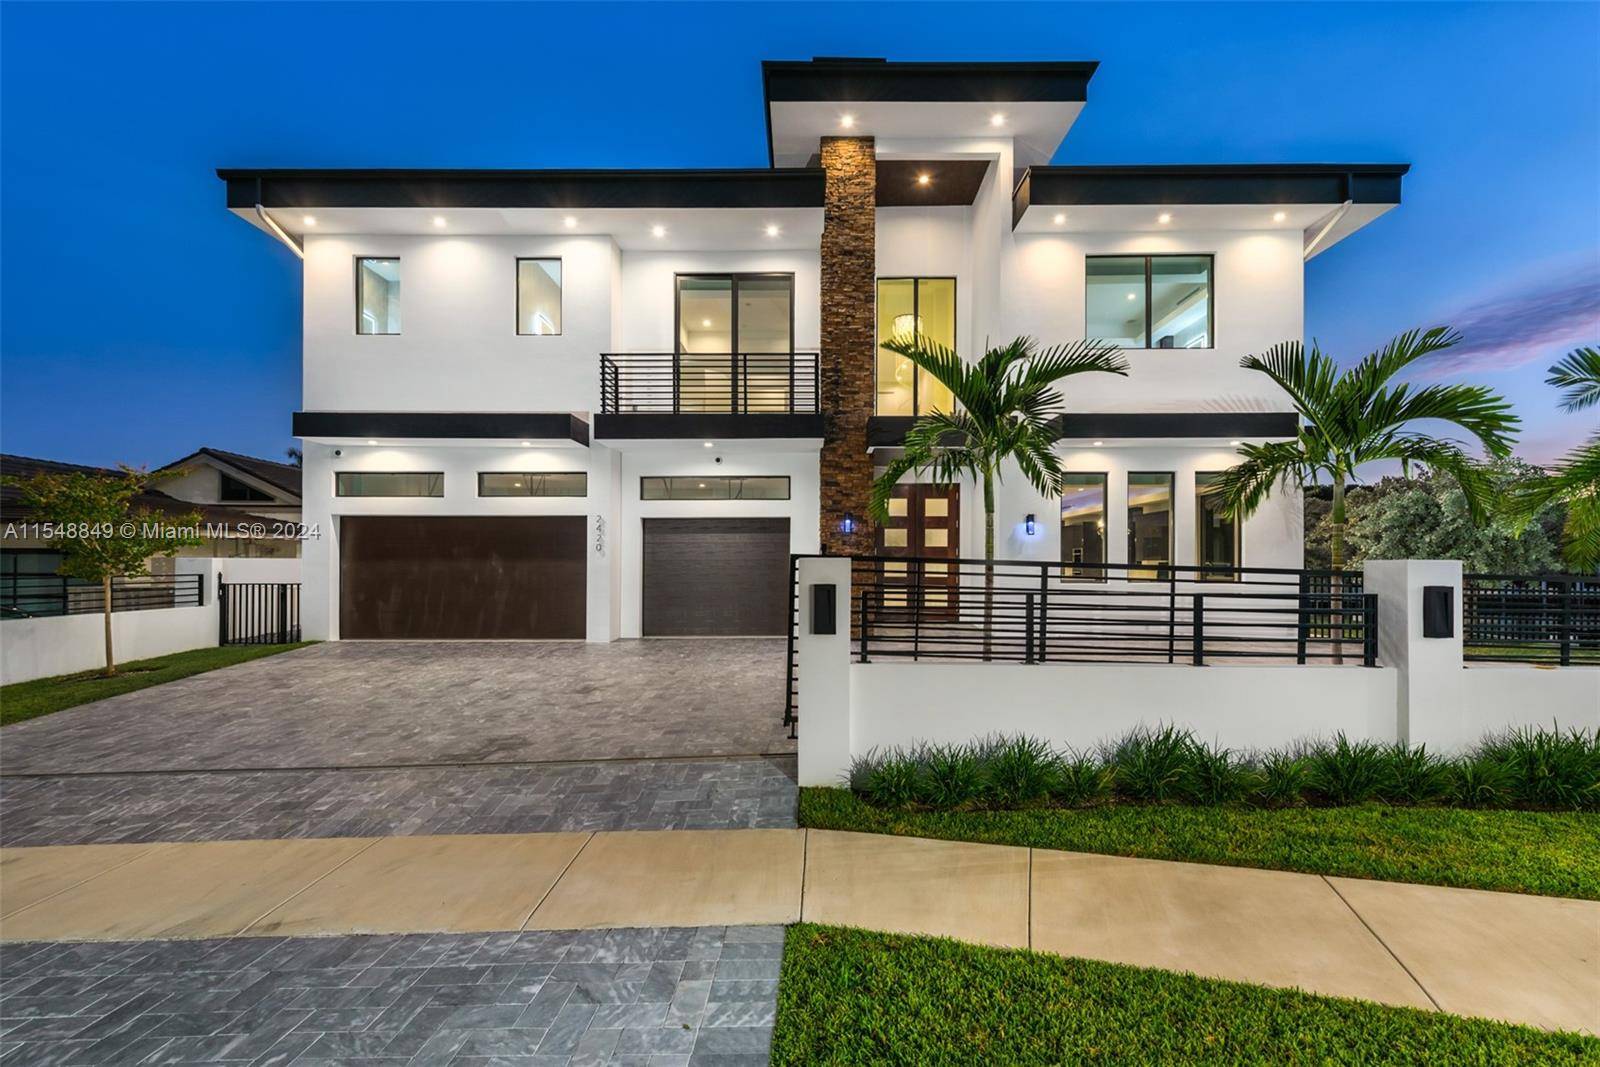 Welcome to paradise ! This Newer Construction, luxury waterfront mansion is located in one of South Florida's prime boating communities, Lighthouse Point.